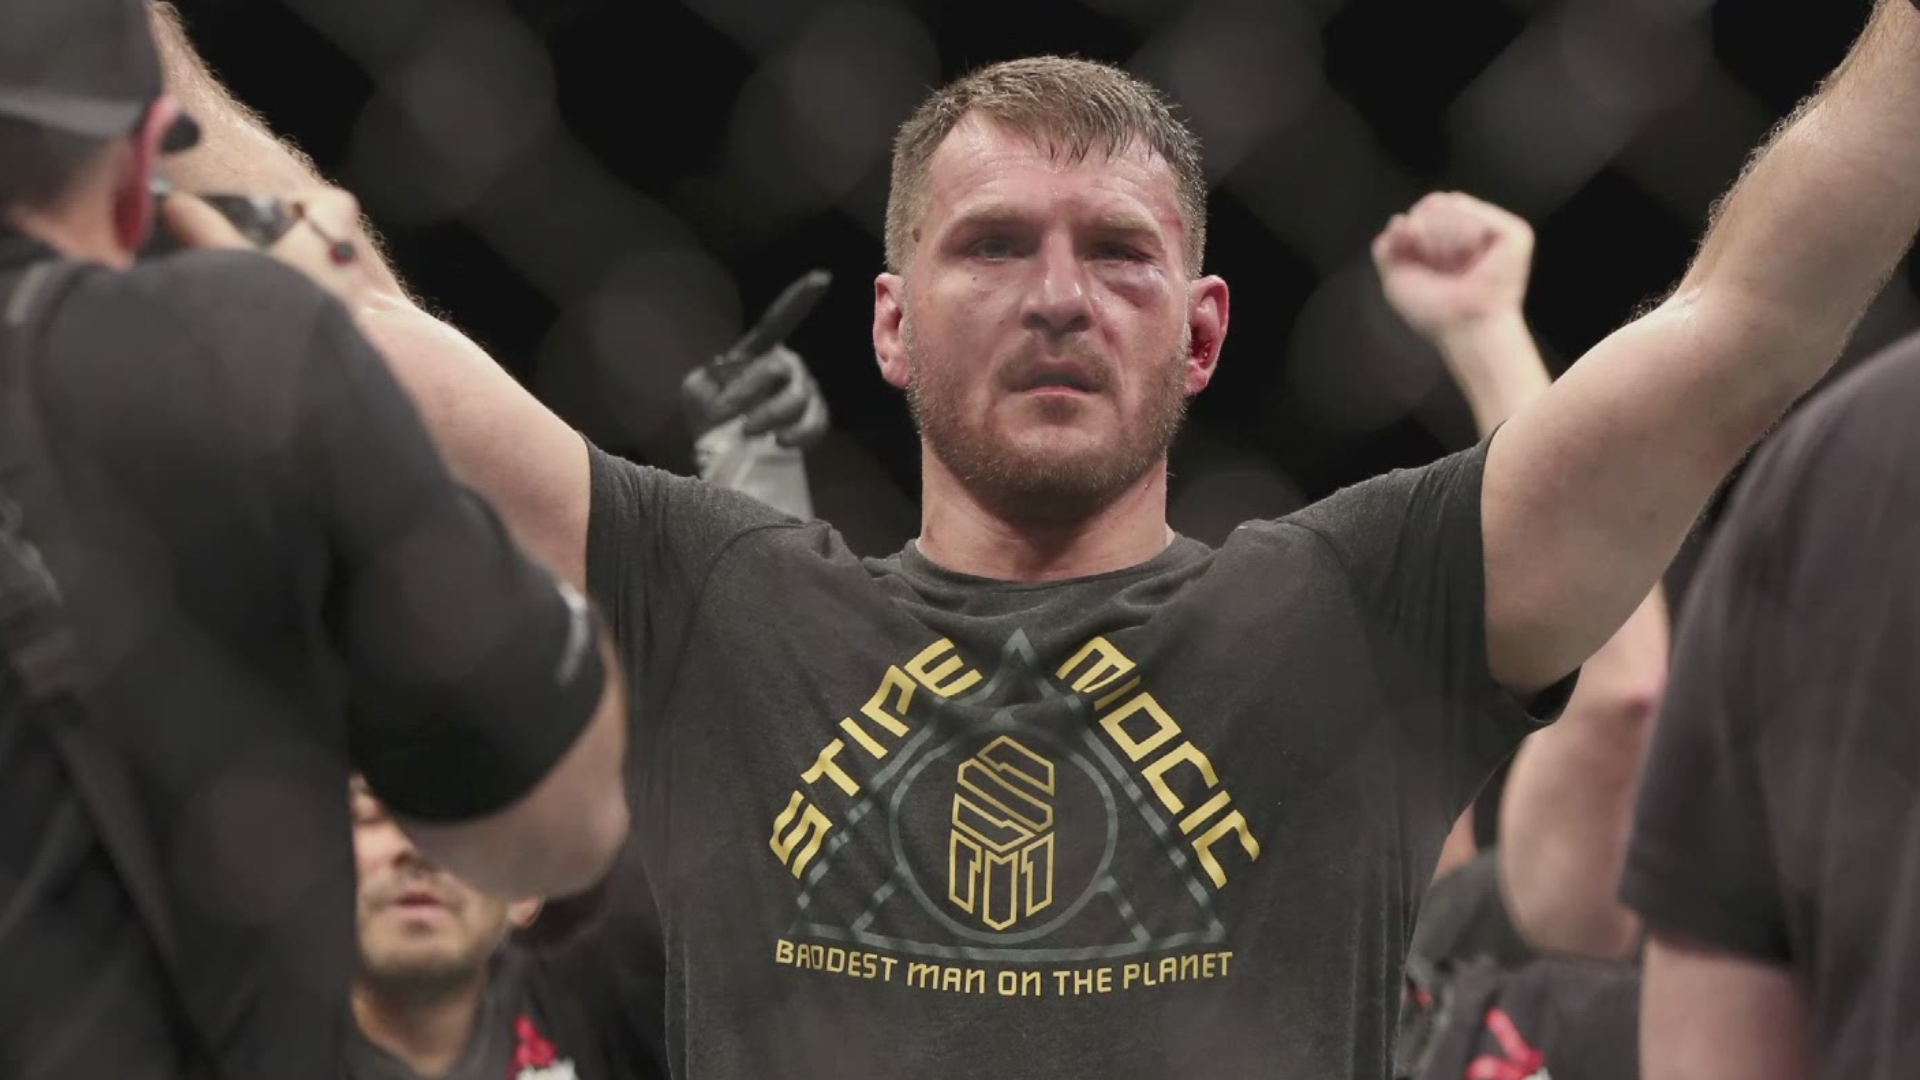 Cleveland native Stipe Miocic is ‘leaving no stone unturned’ in his preparation for a UFC heavyweight championship rematch with Daniel Cormier.